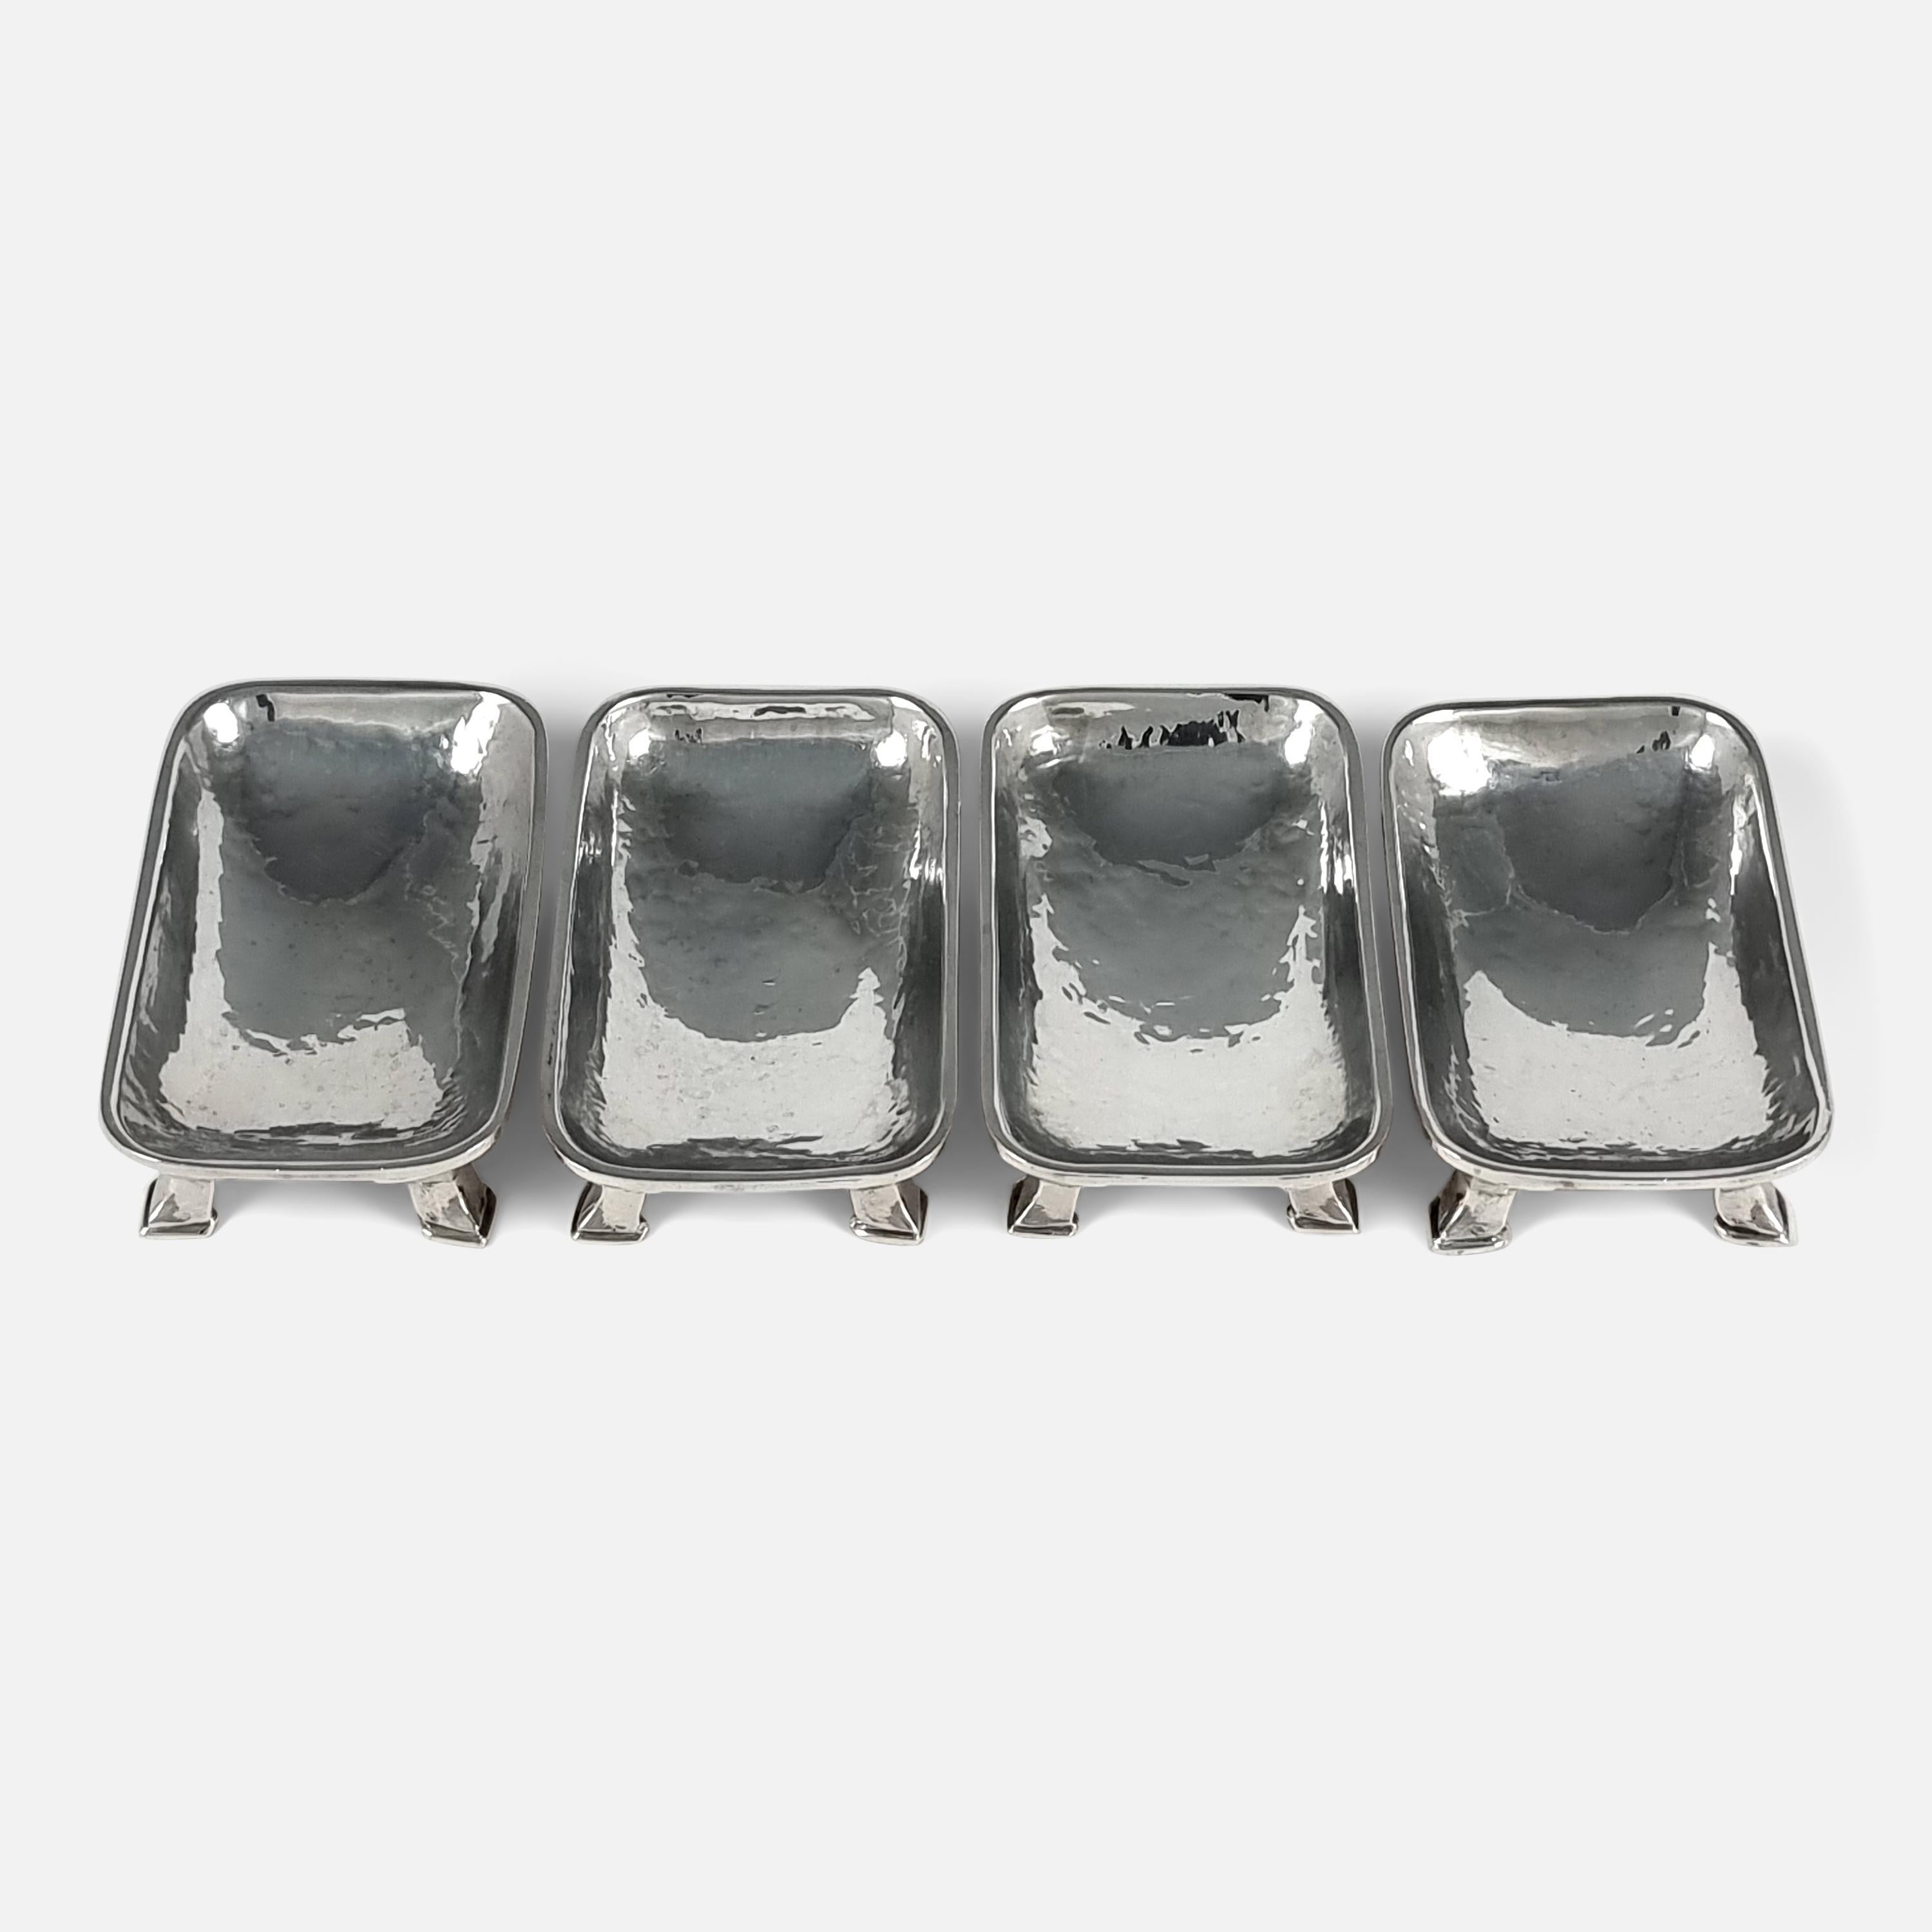 Set of 4 Arts and Crafts Silver Salts, Omar Ramsden, 1935 For Sale 4